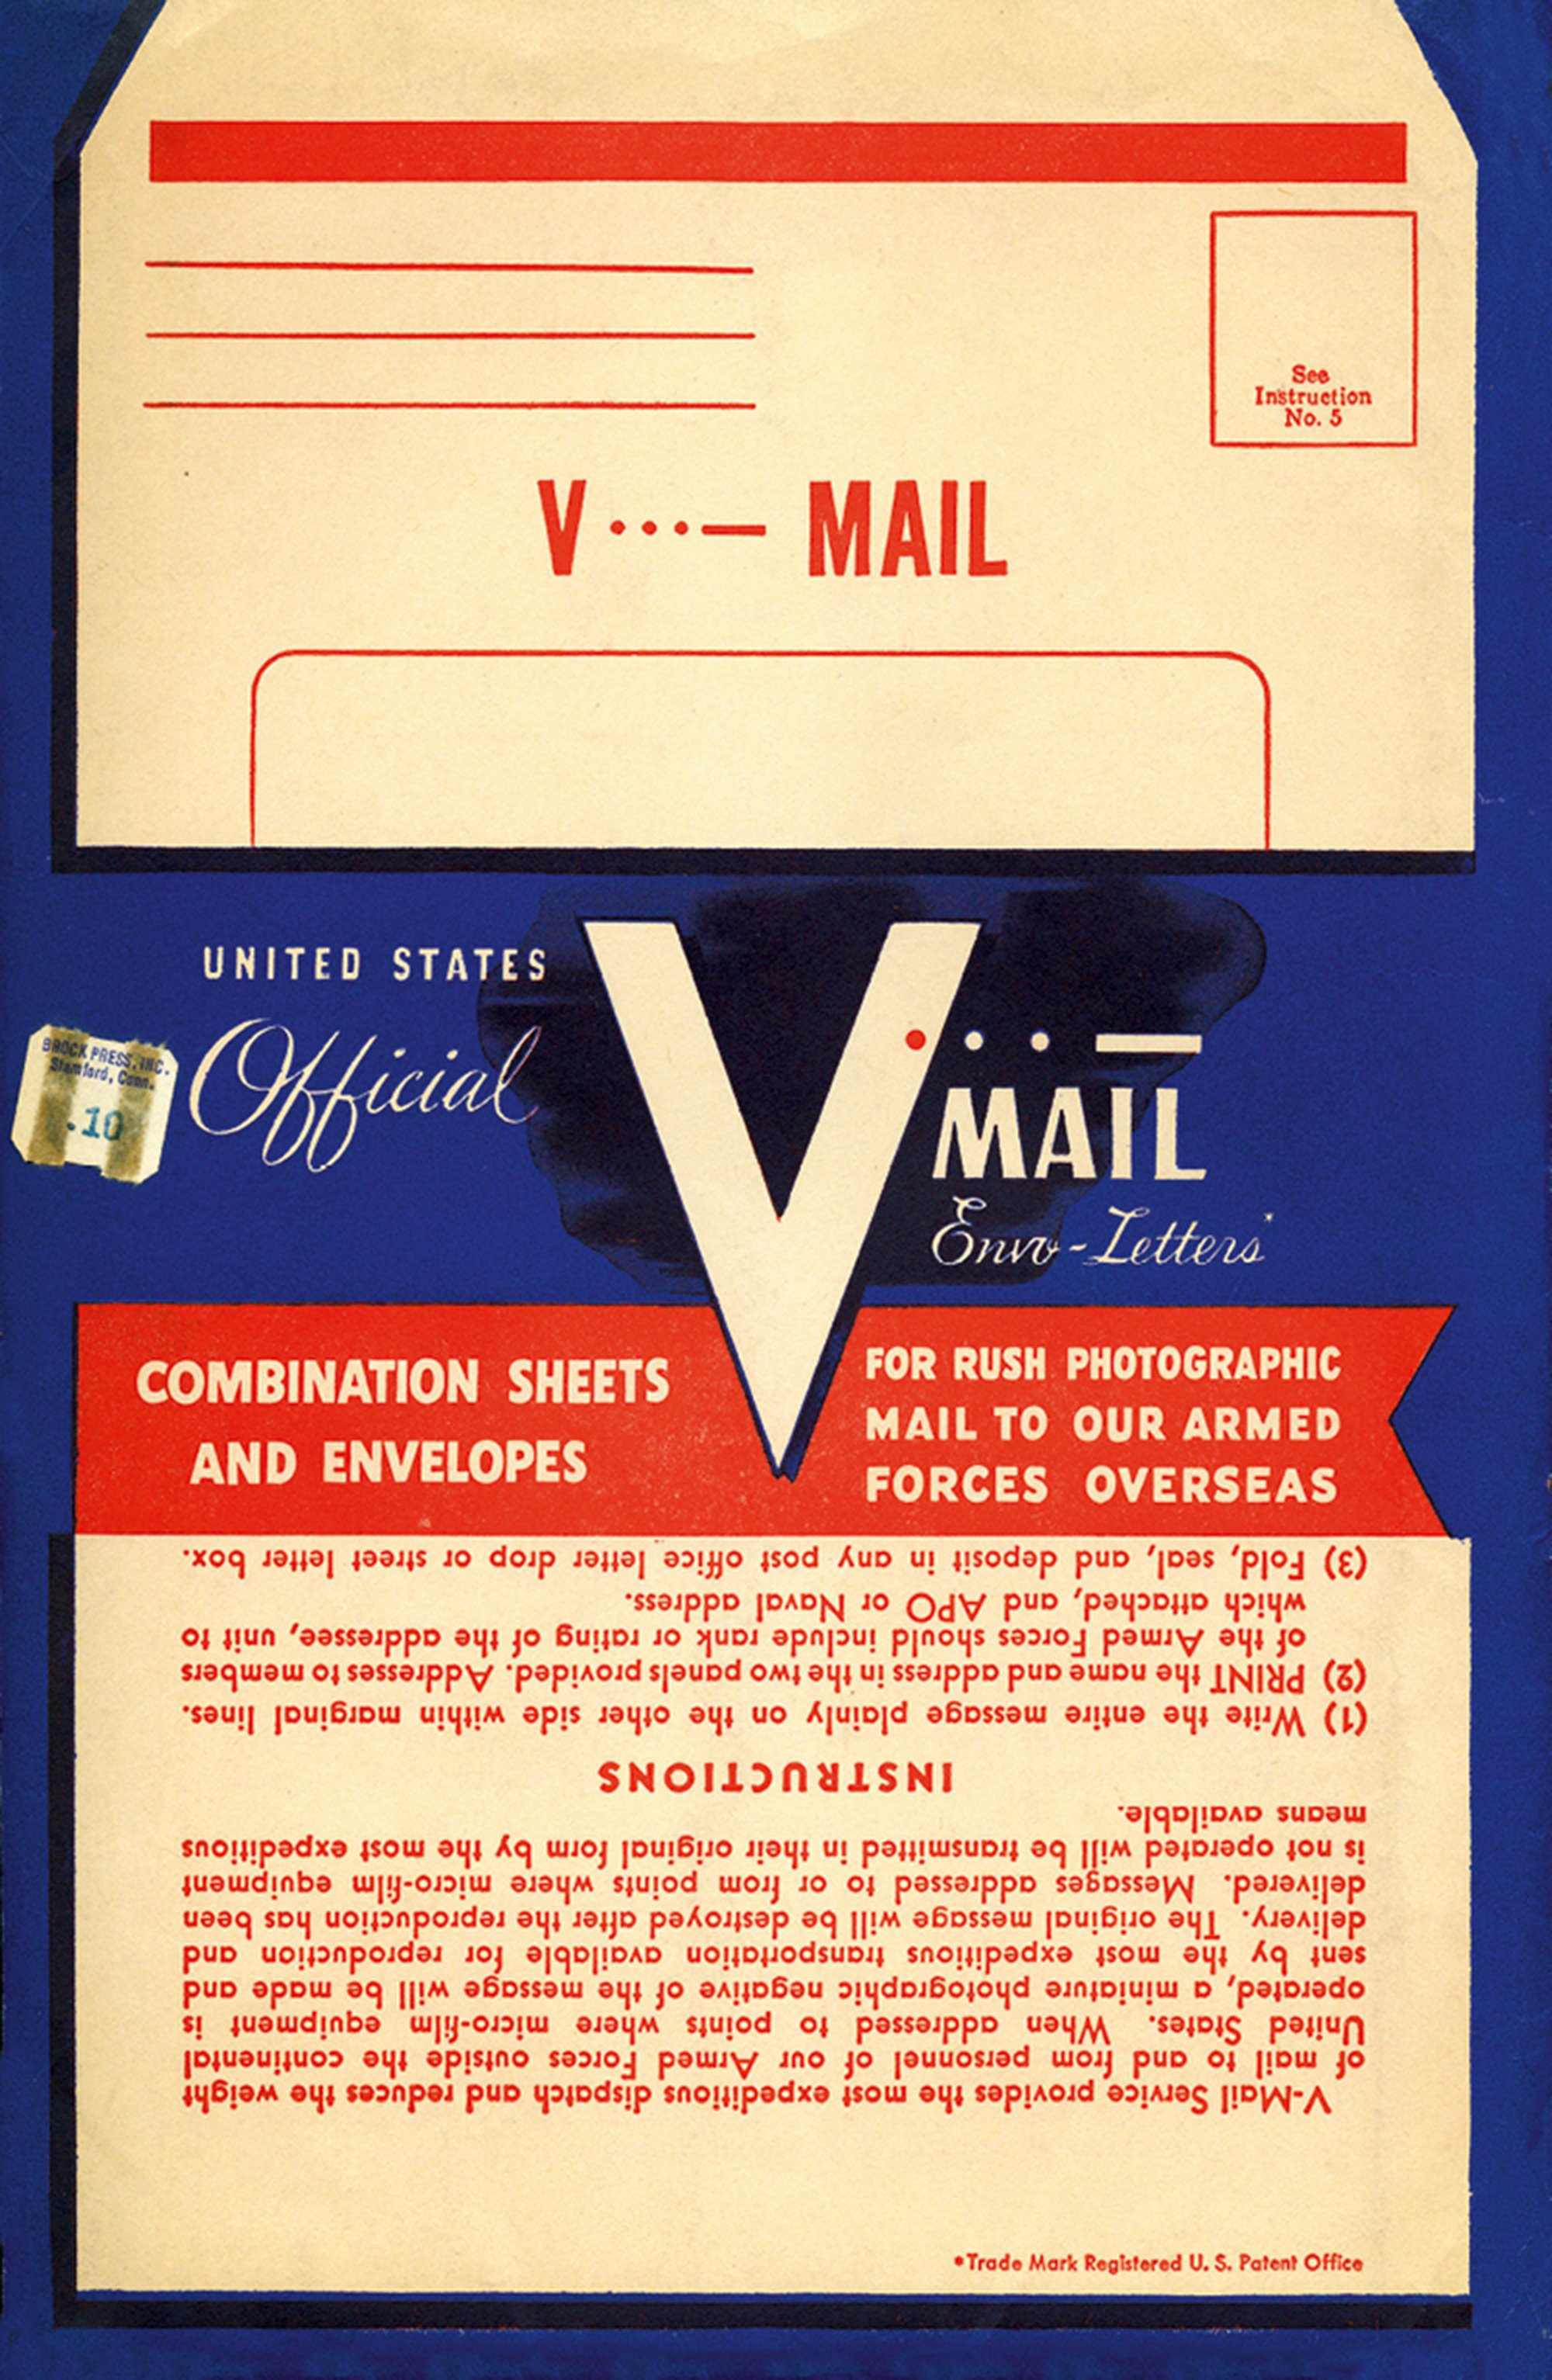 Patriotic packaging for V-Mail, a special stationery and envelope system created during World War II for correspondence between the US and overseas military personnel.